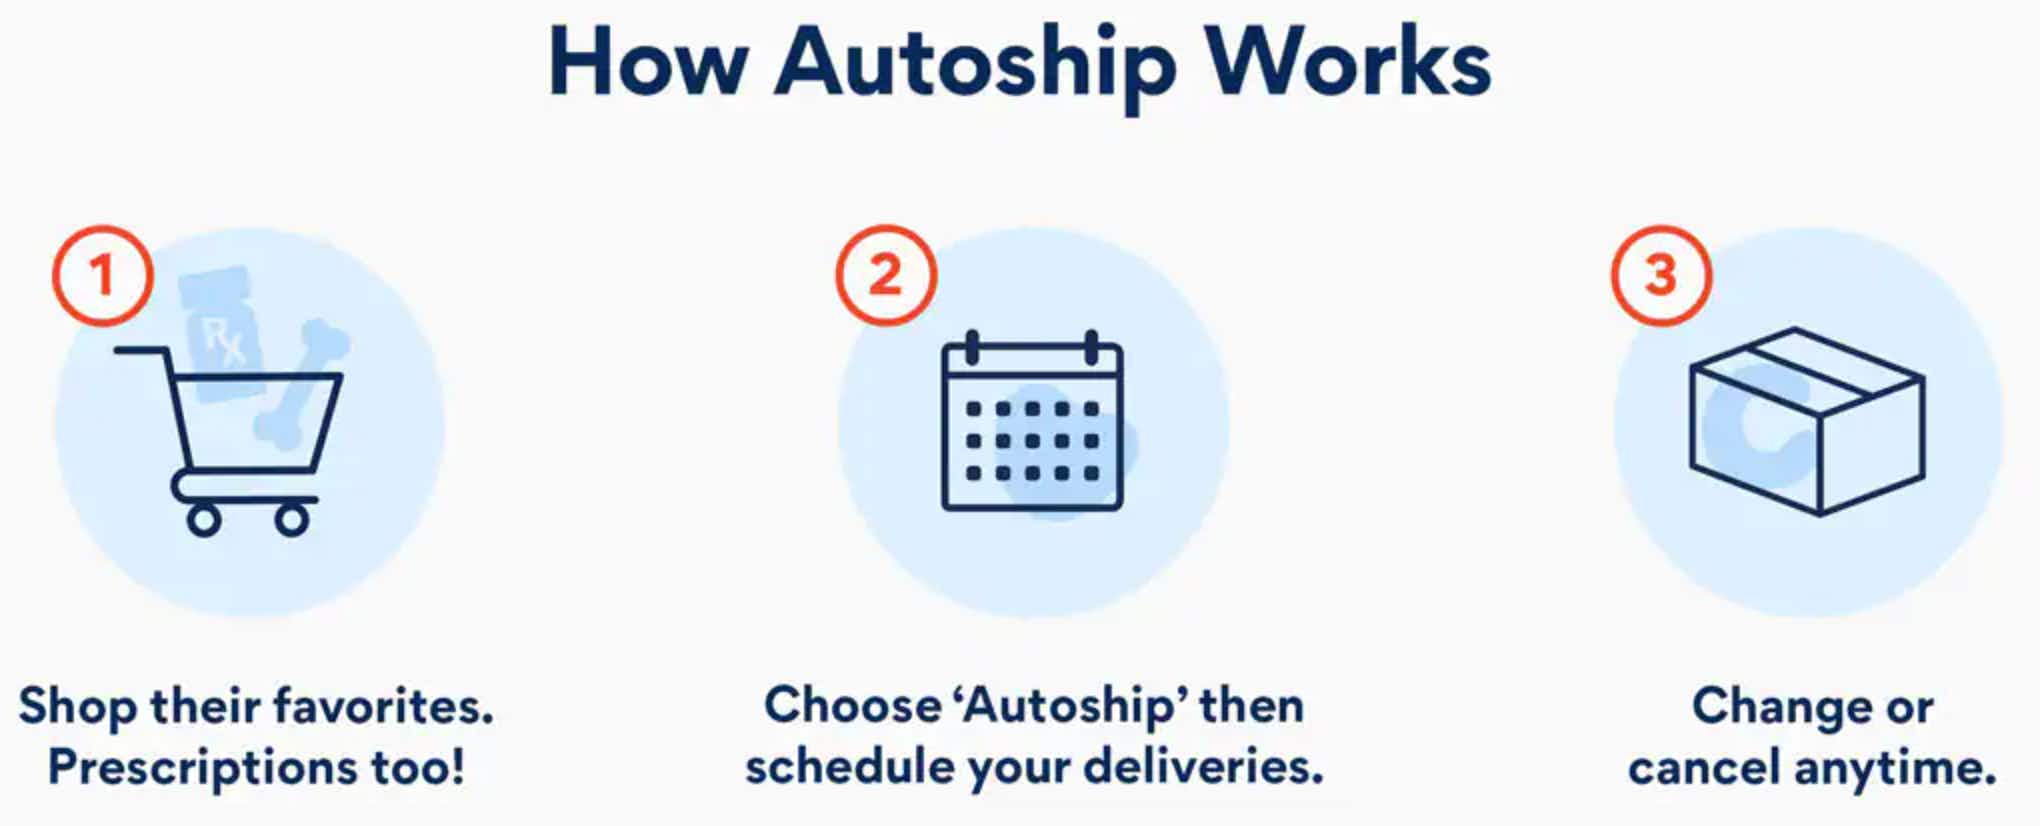 A screenshot from the Chewy.com website showing the graphic outlining the process of how autoship works.